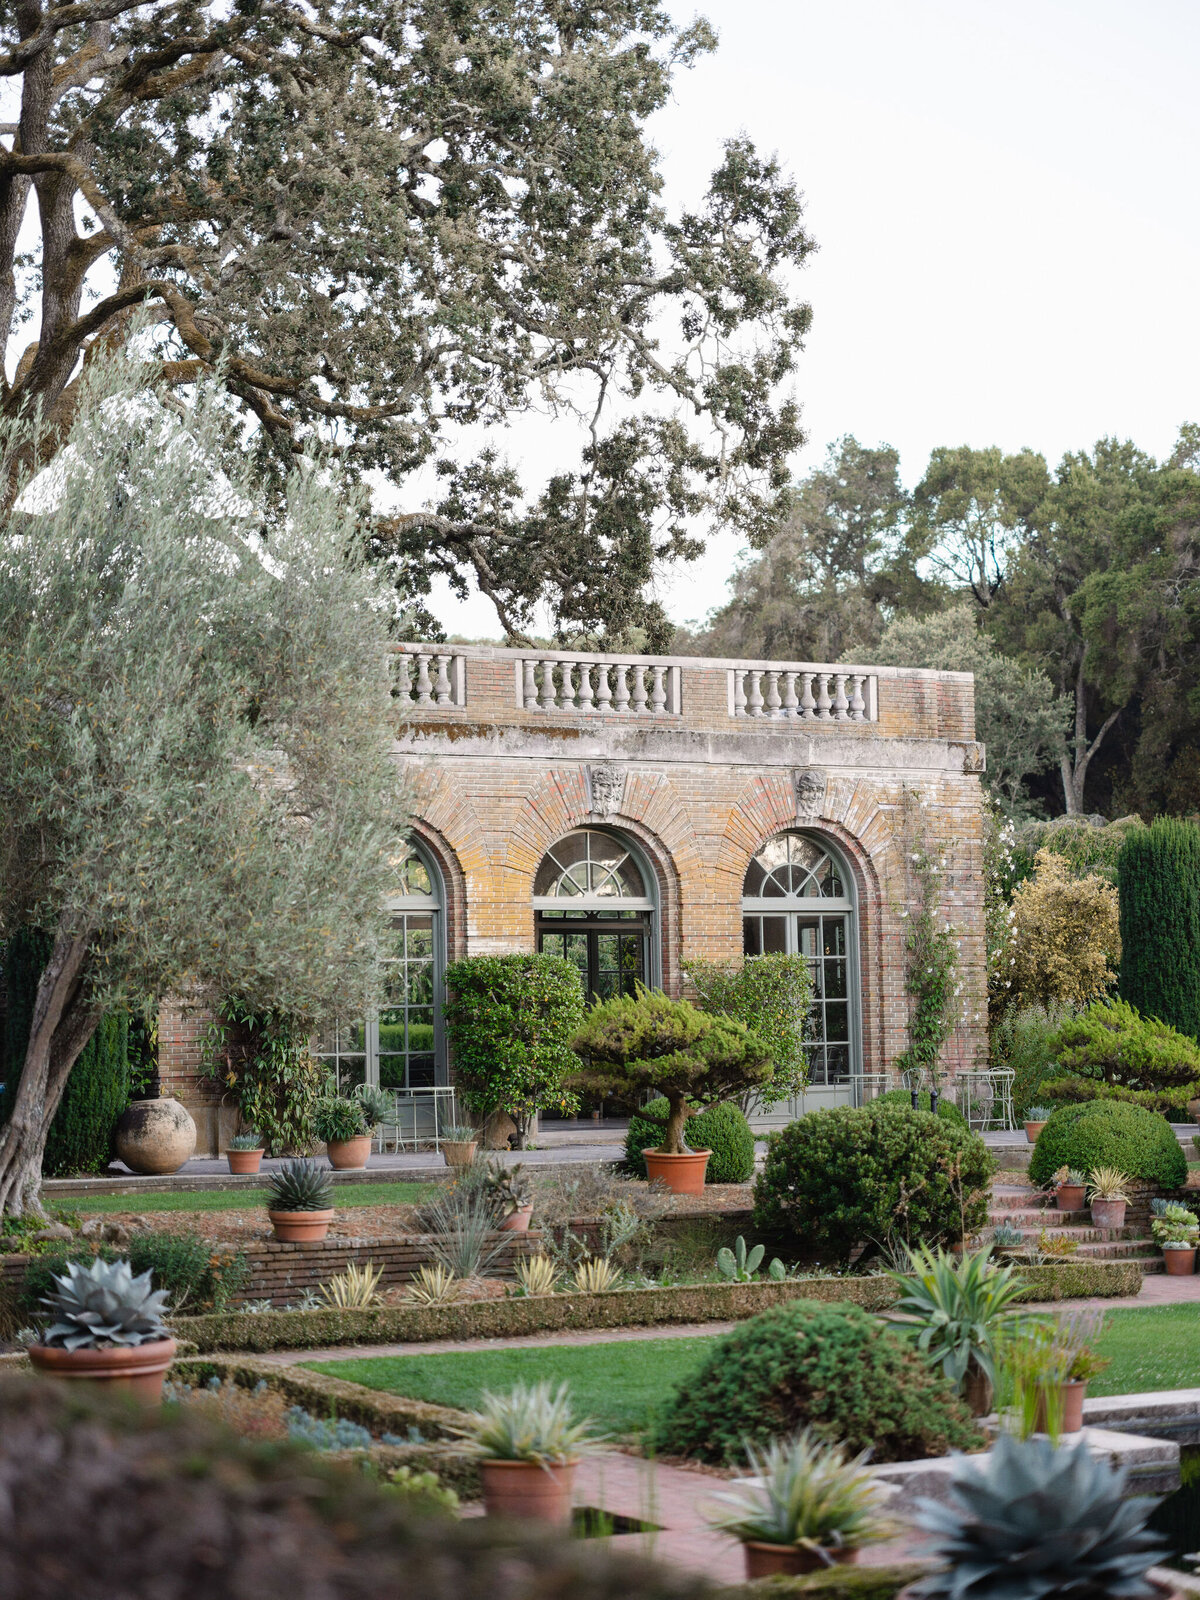 classic image of filoli's sunken garden for an exclusive filoli buyout for a wedding